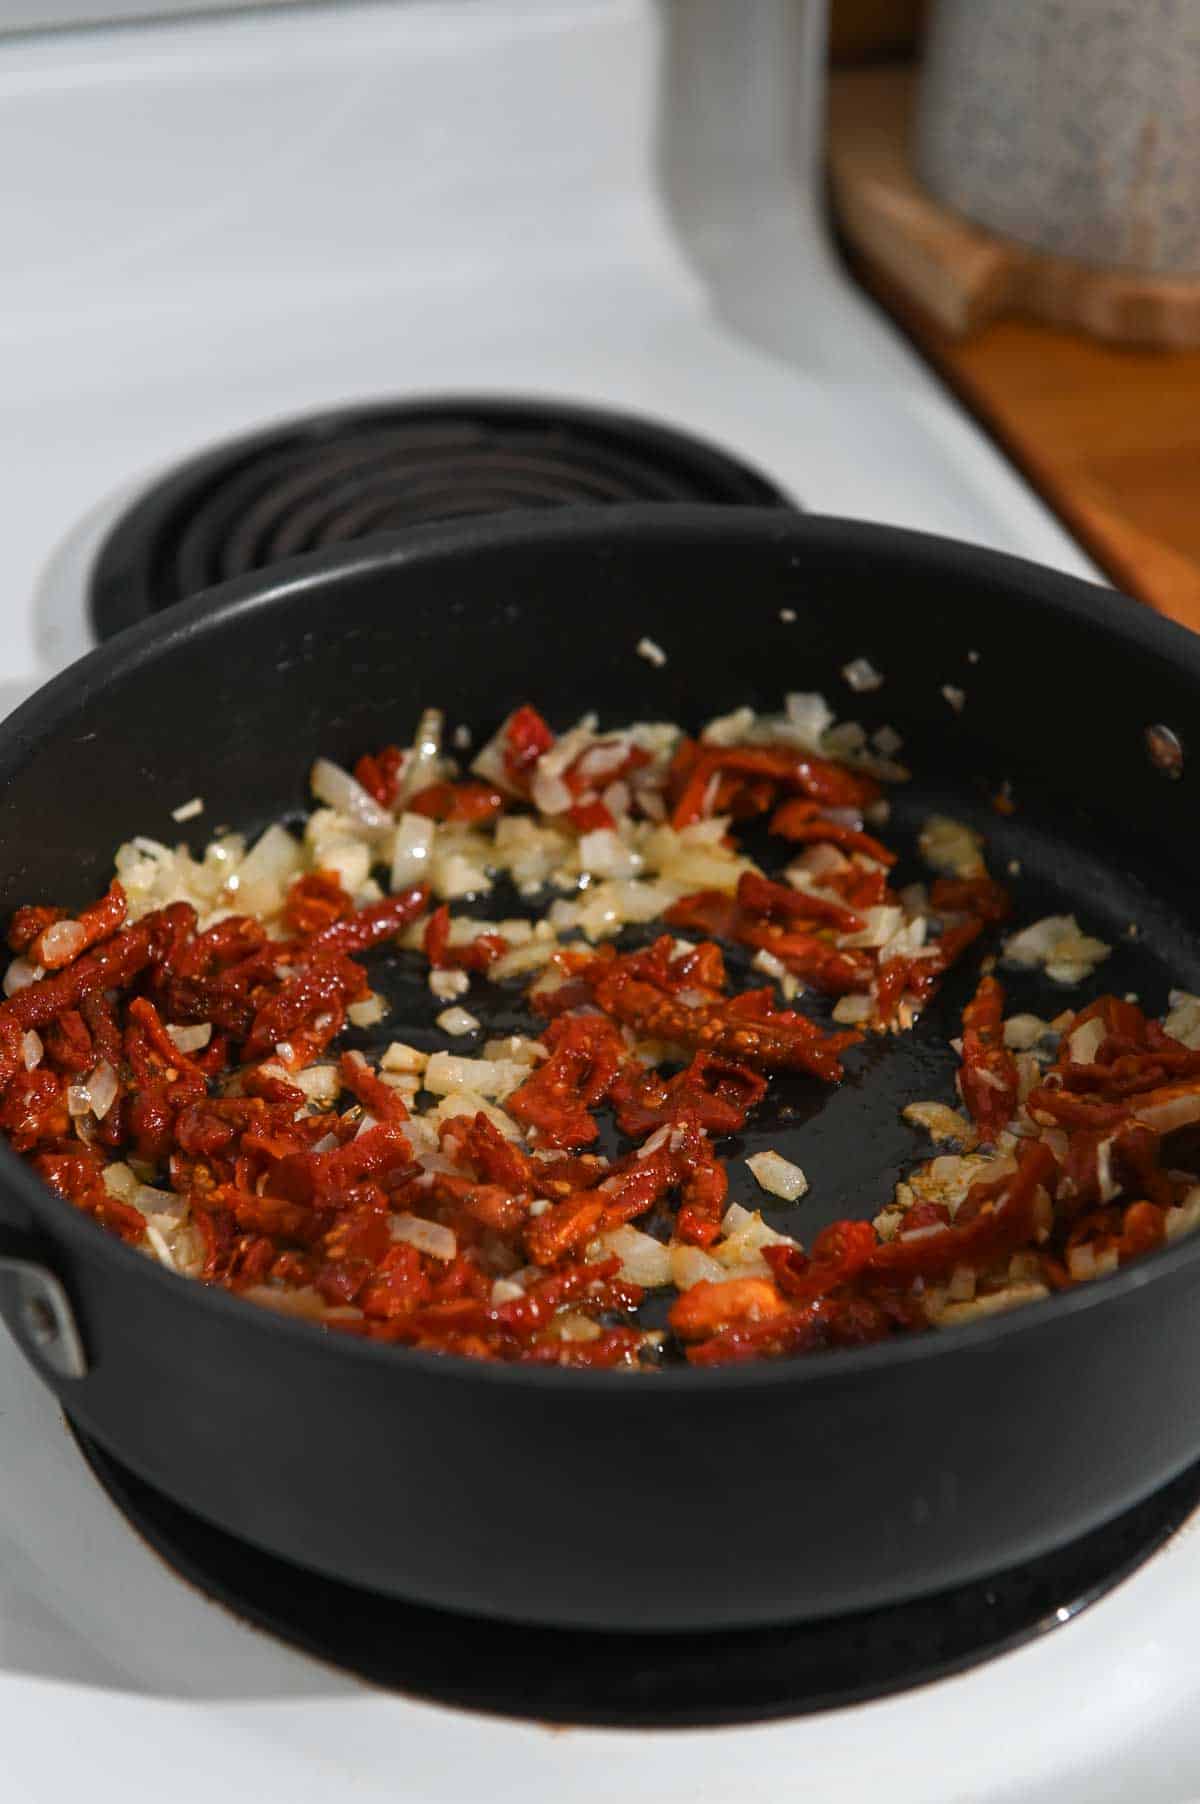 Sundried tomato and onion sautéing in a black skillet.